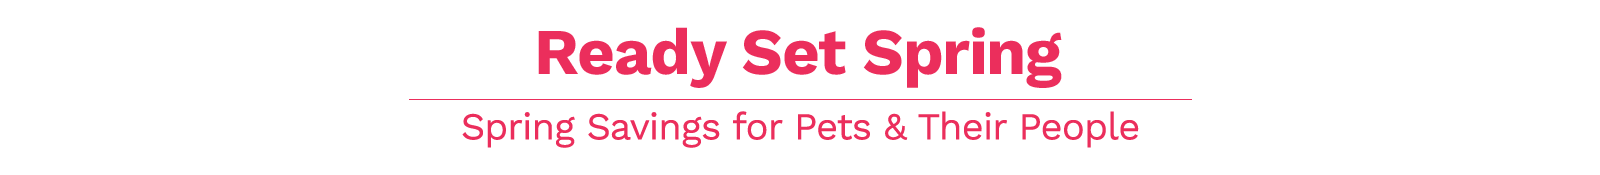 Ready Set Spring | Spring Savings for Pets & Their People